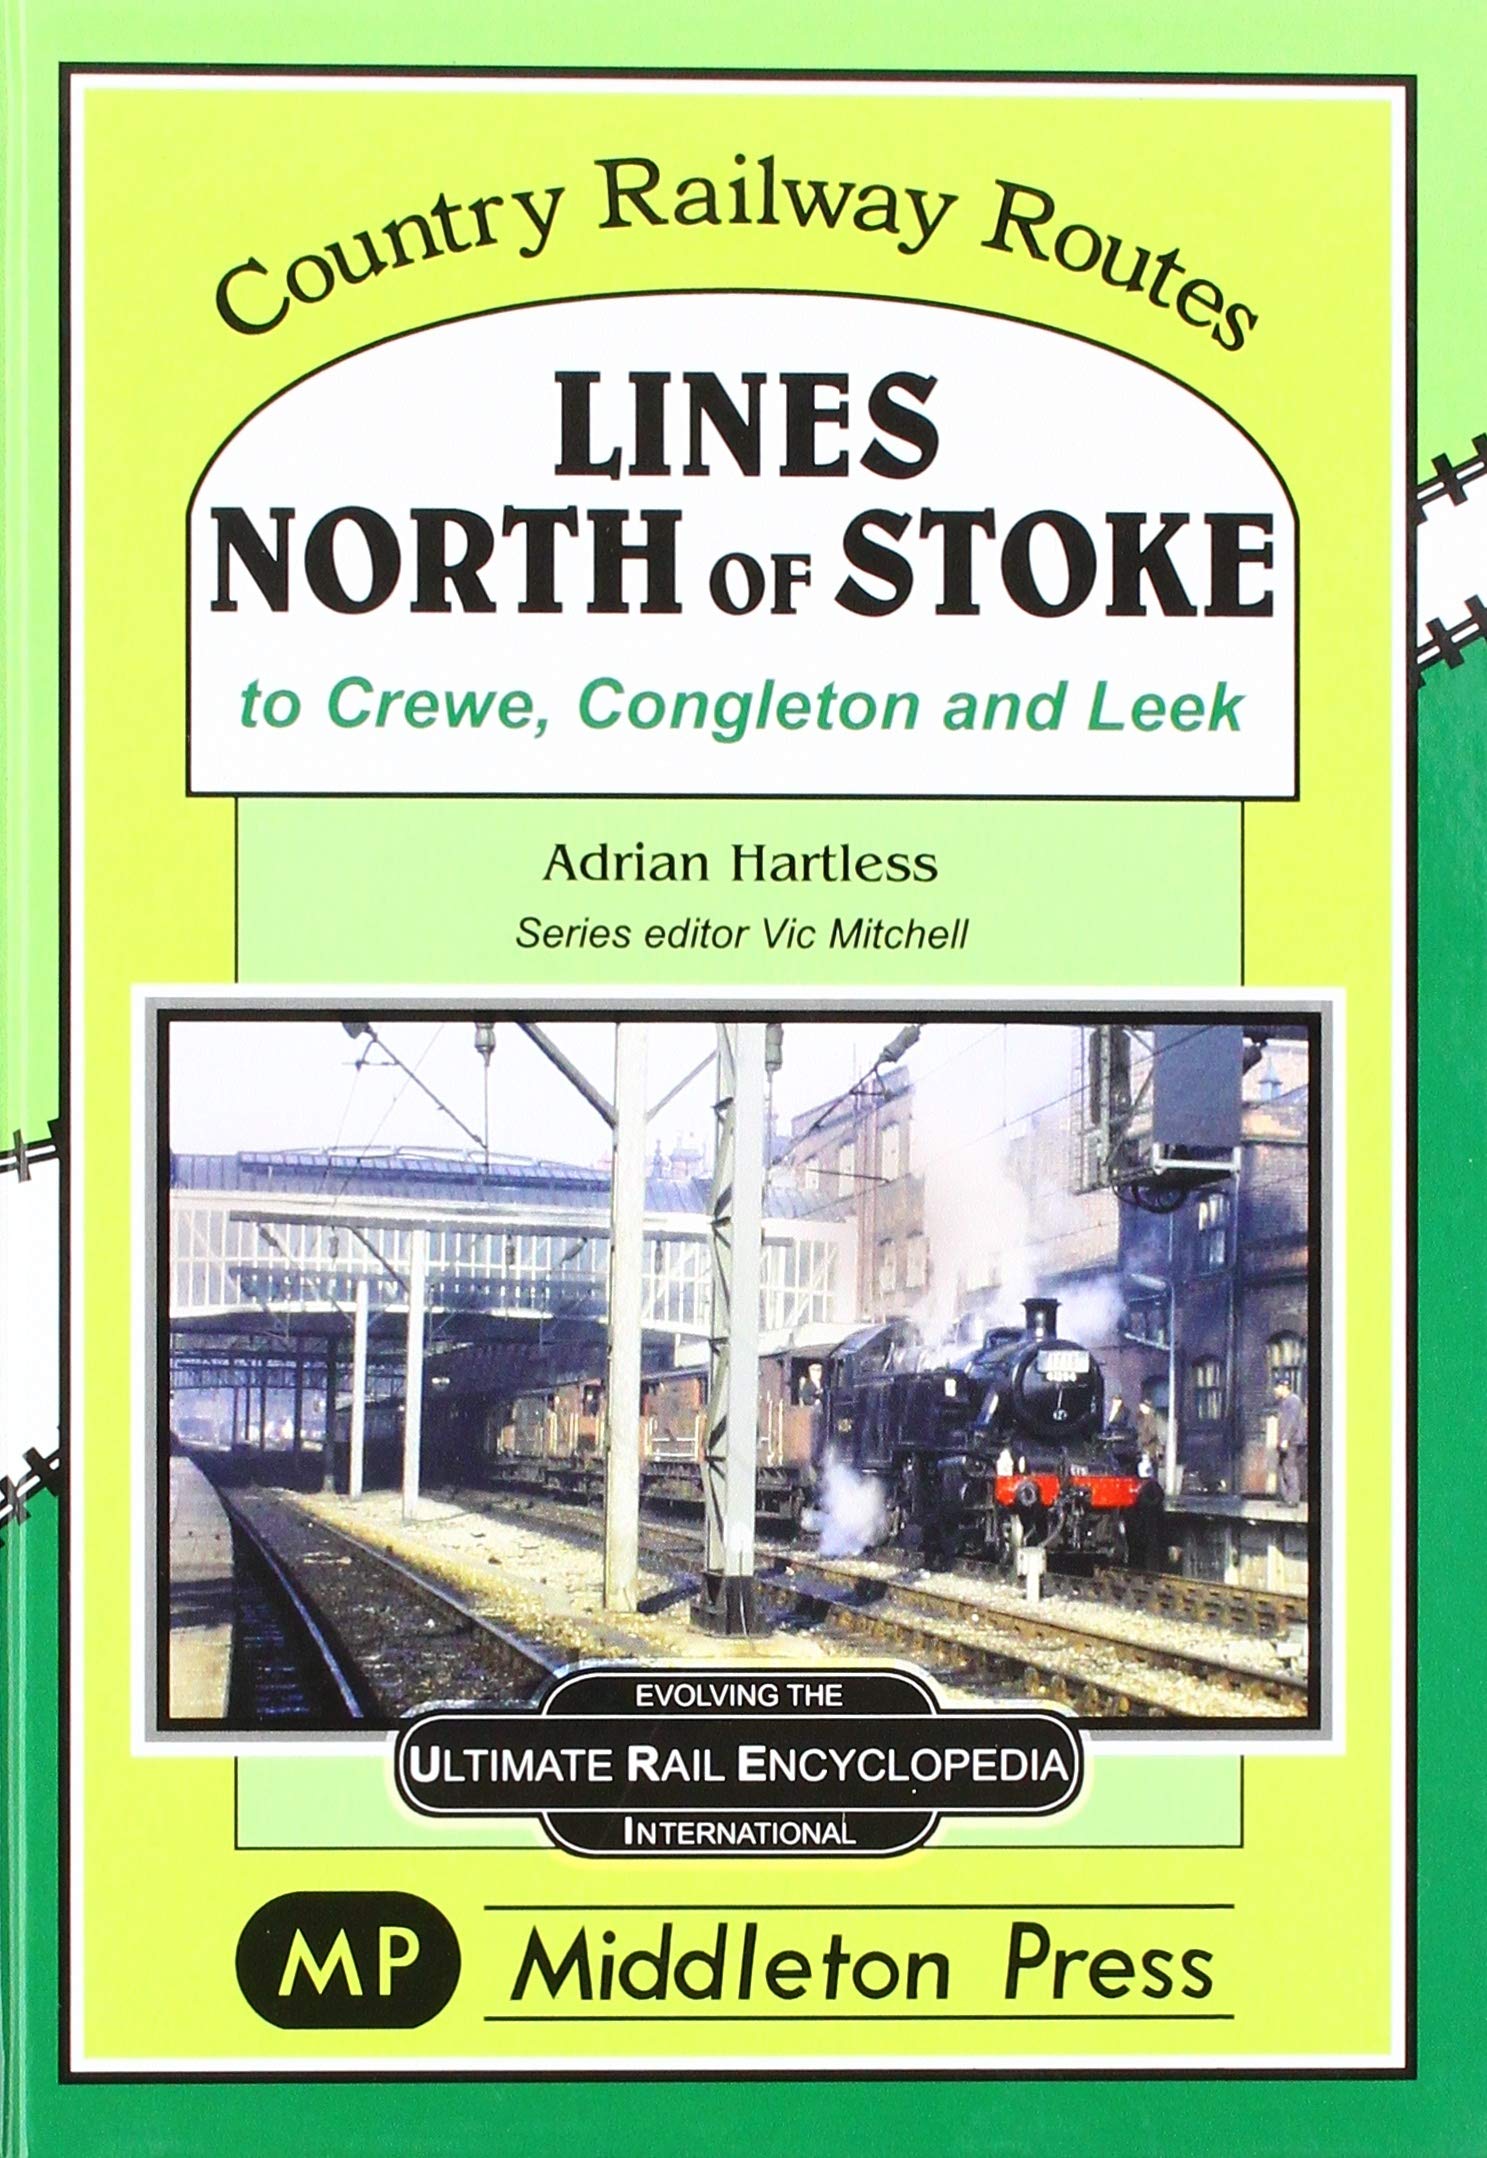 Country Railway Routes Lines North of Stoke to Crewe, Congleton and Leek